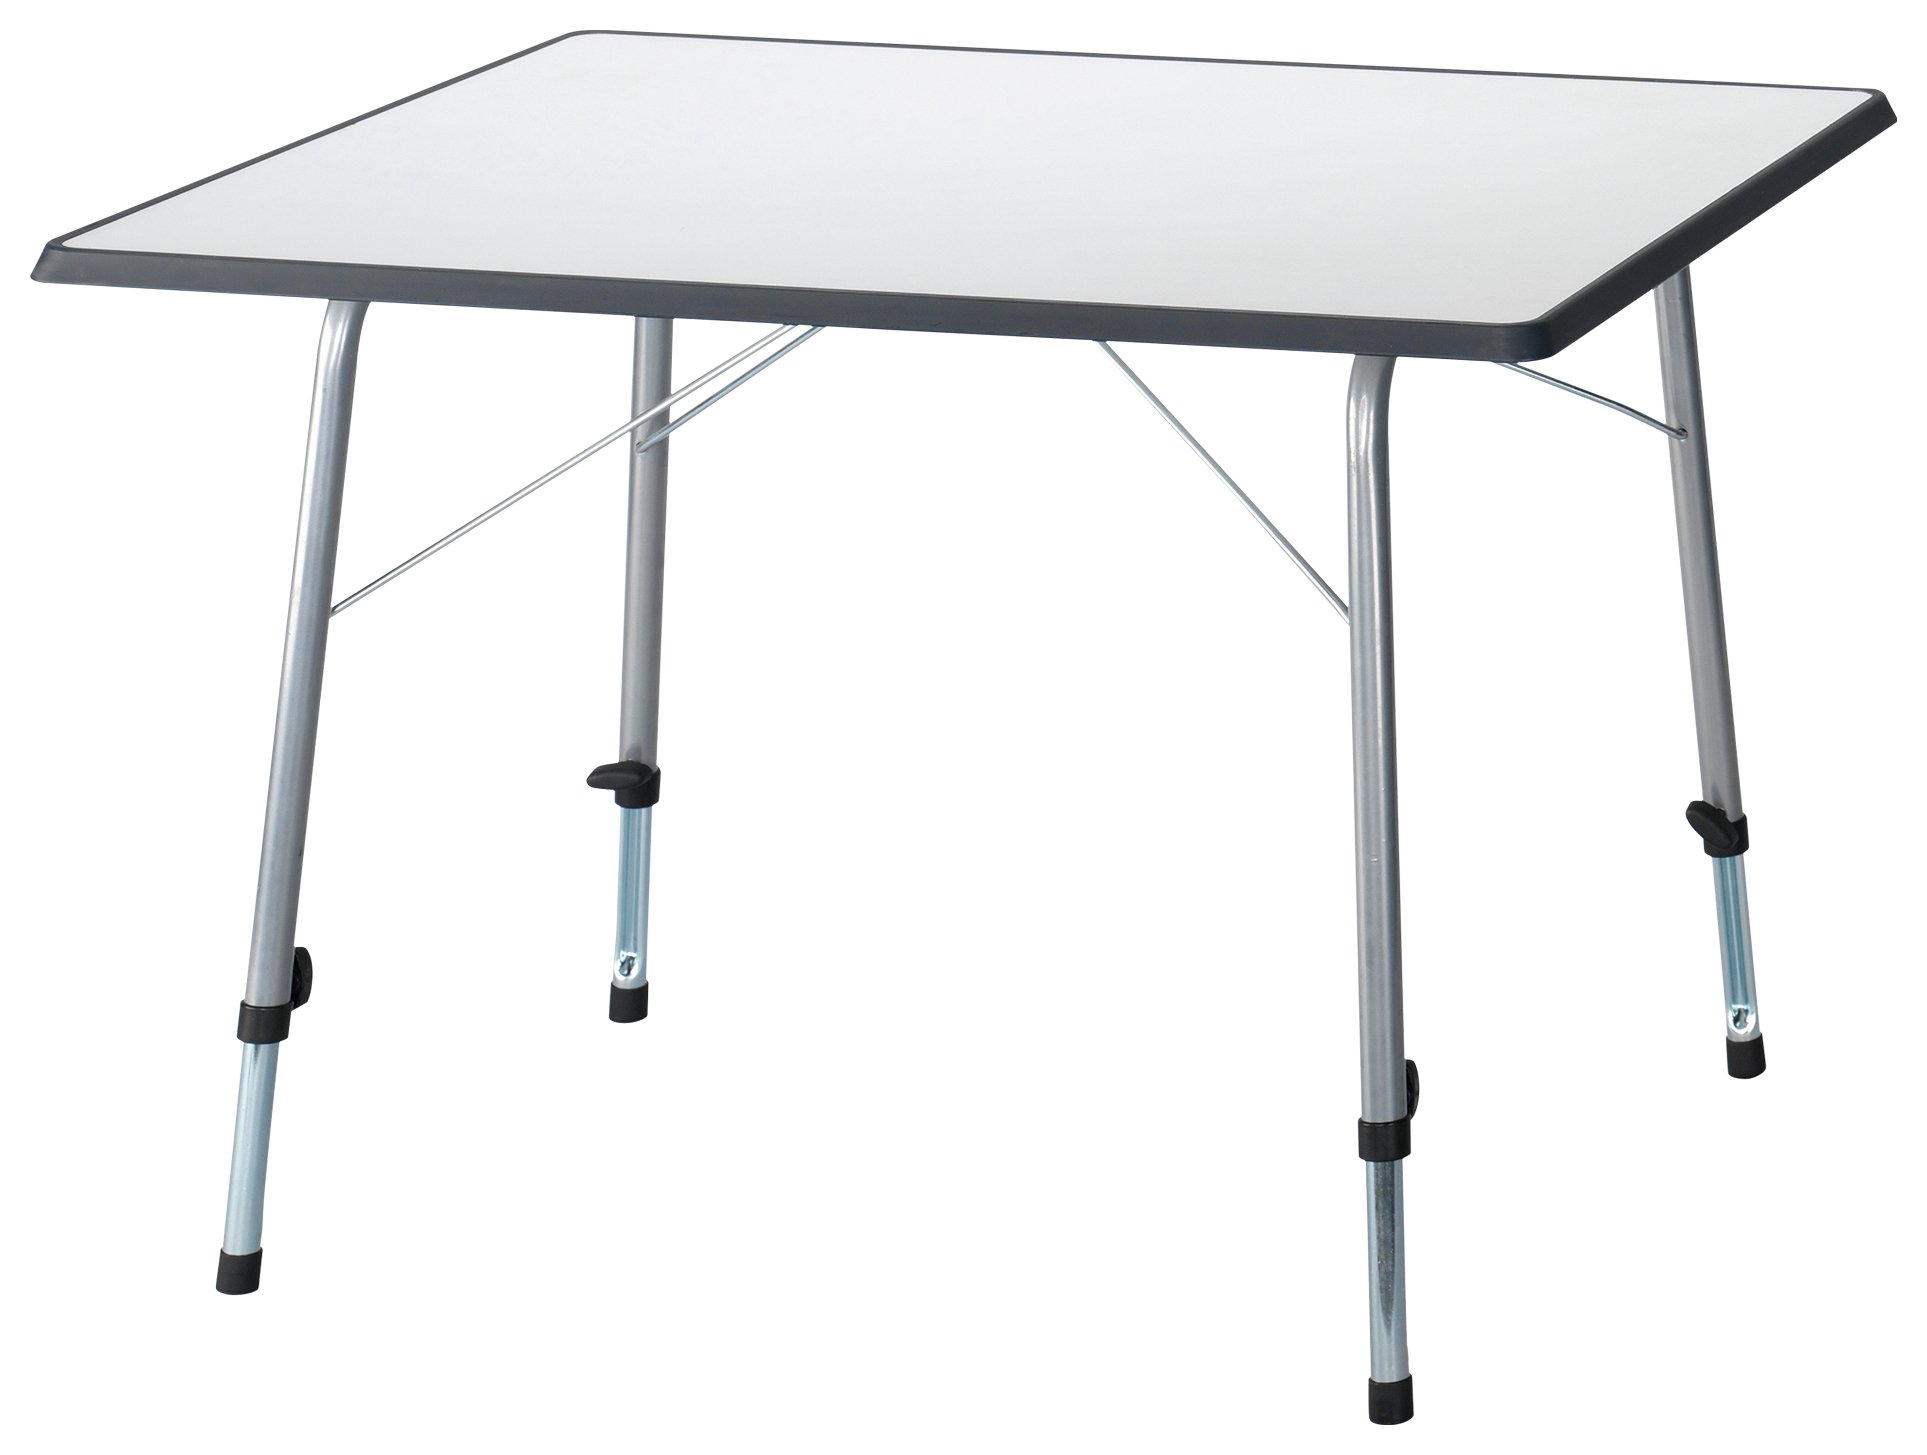 Tristar 80 x 60 x 54cm Foldable Camping Table